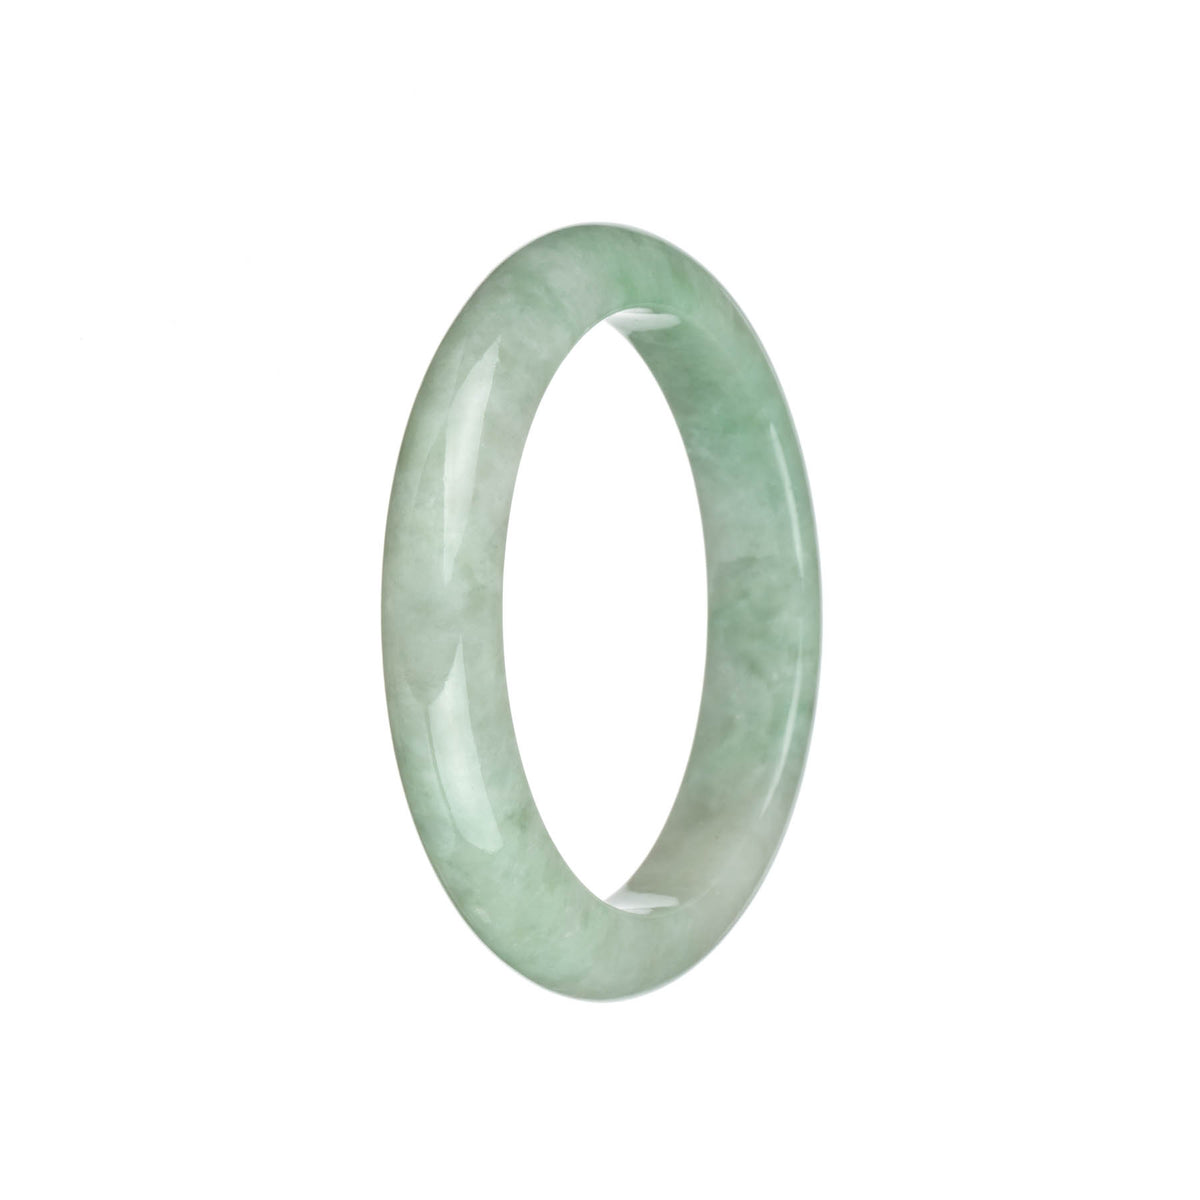 Real Type A Light Green with White Traditional Jade Bangle Bracelet - 57mm Semi Round